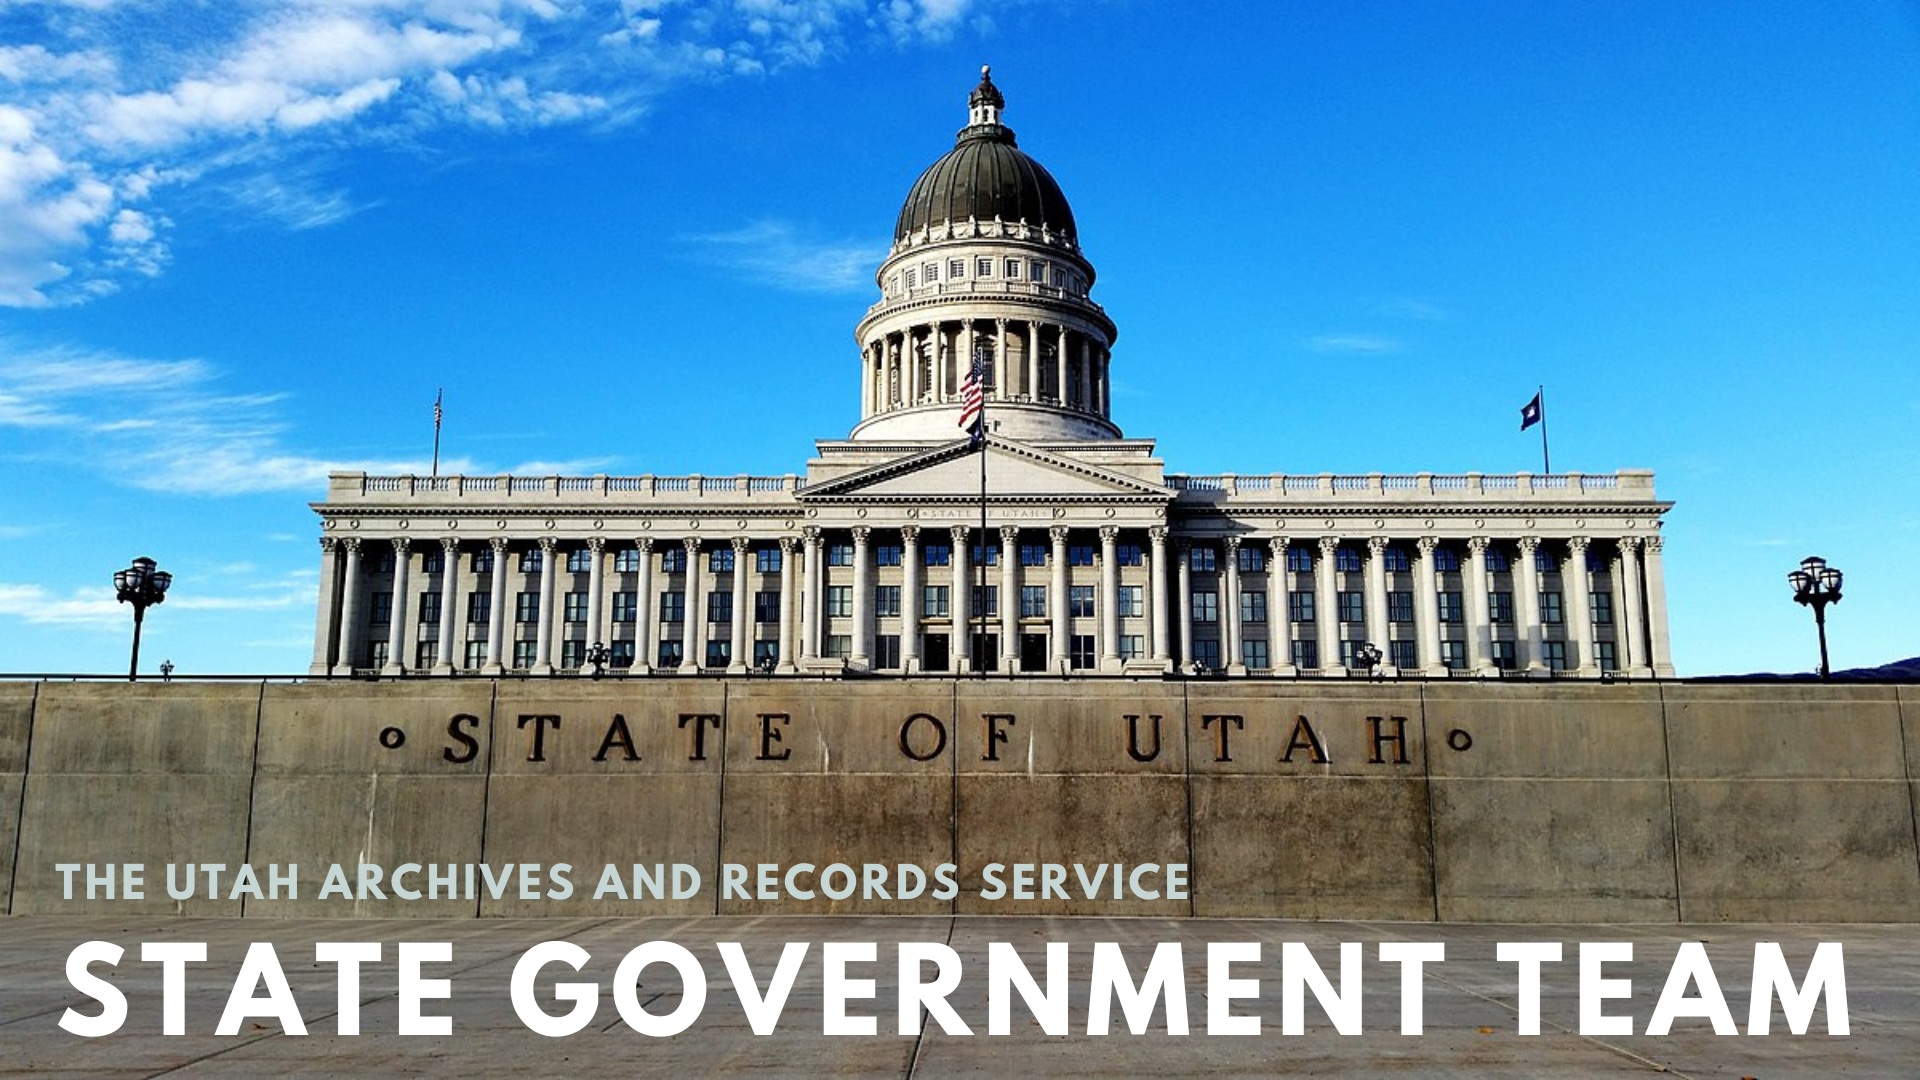 Featured image for “Meet the State Government Team!”